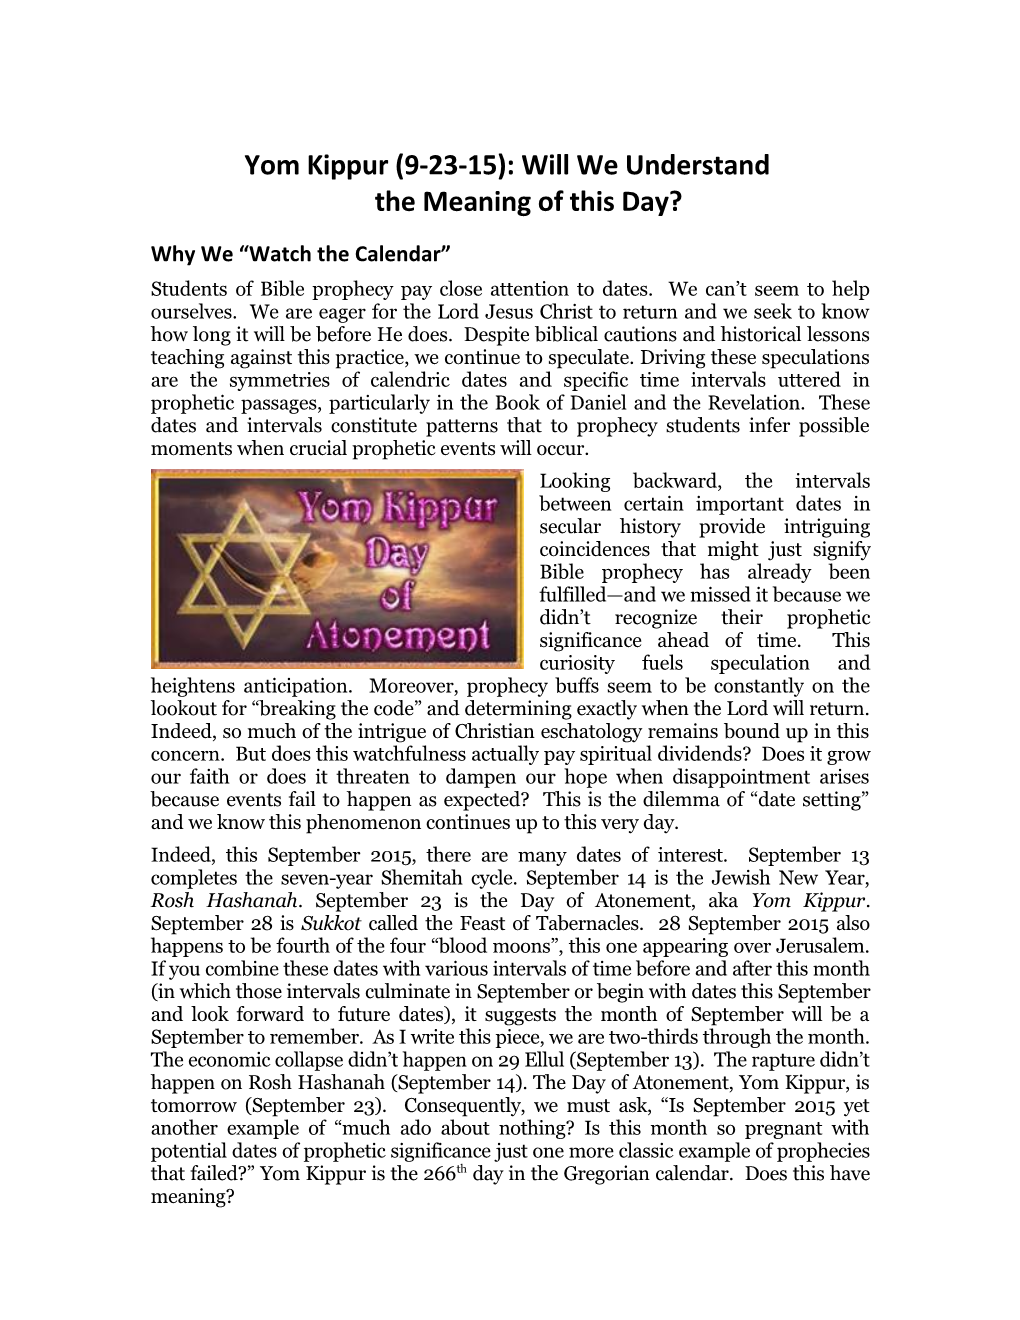 Yom Kippur (9-23-15): Will We Understand the Meaning of This Day?